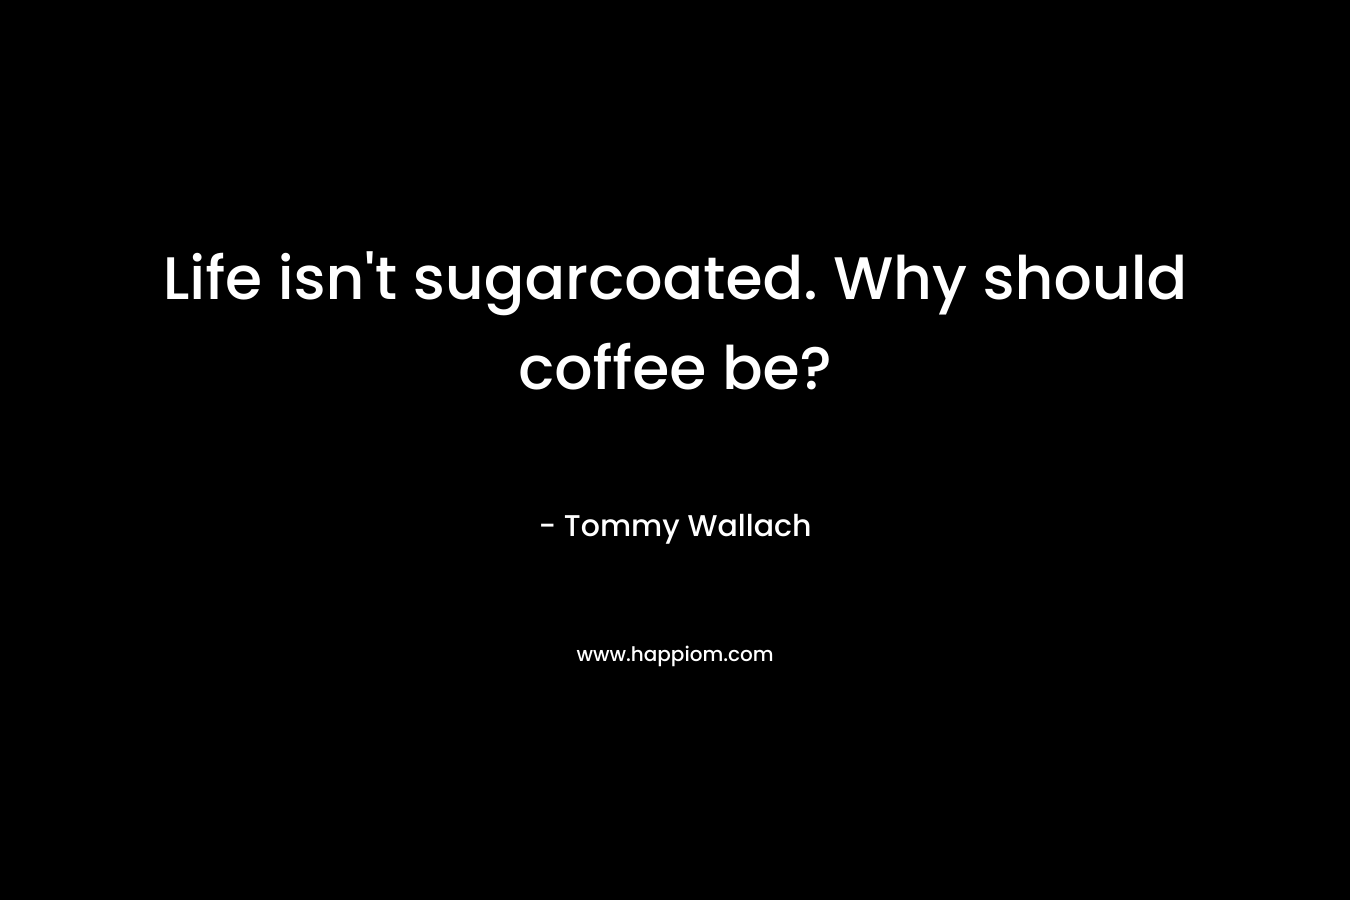 Life isn't sugarcoated. Why should coffee be?